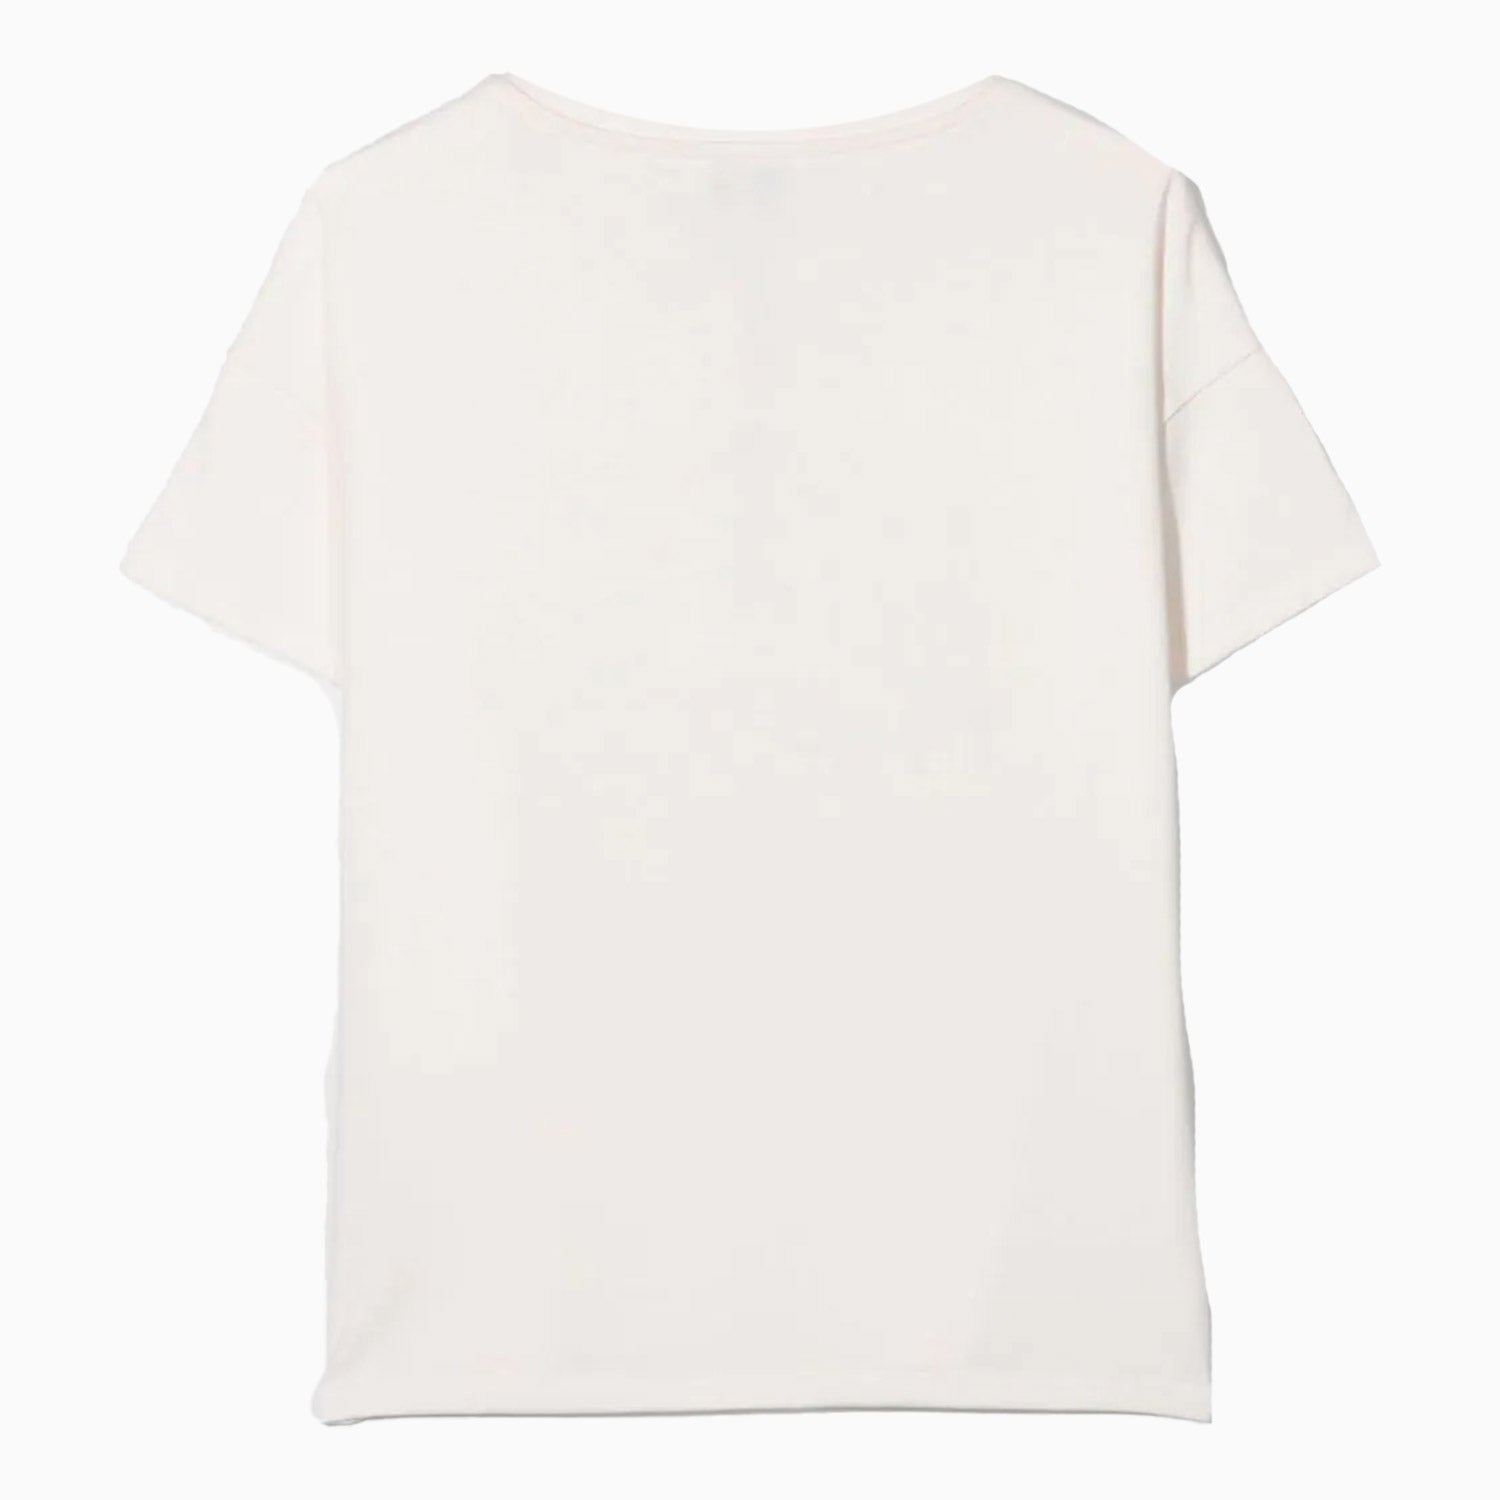 Kenzo Kids Embriodered Logo T Shirt - Color: Off White - Kids Premium Clothing -